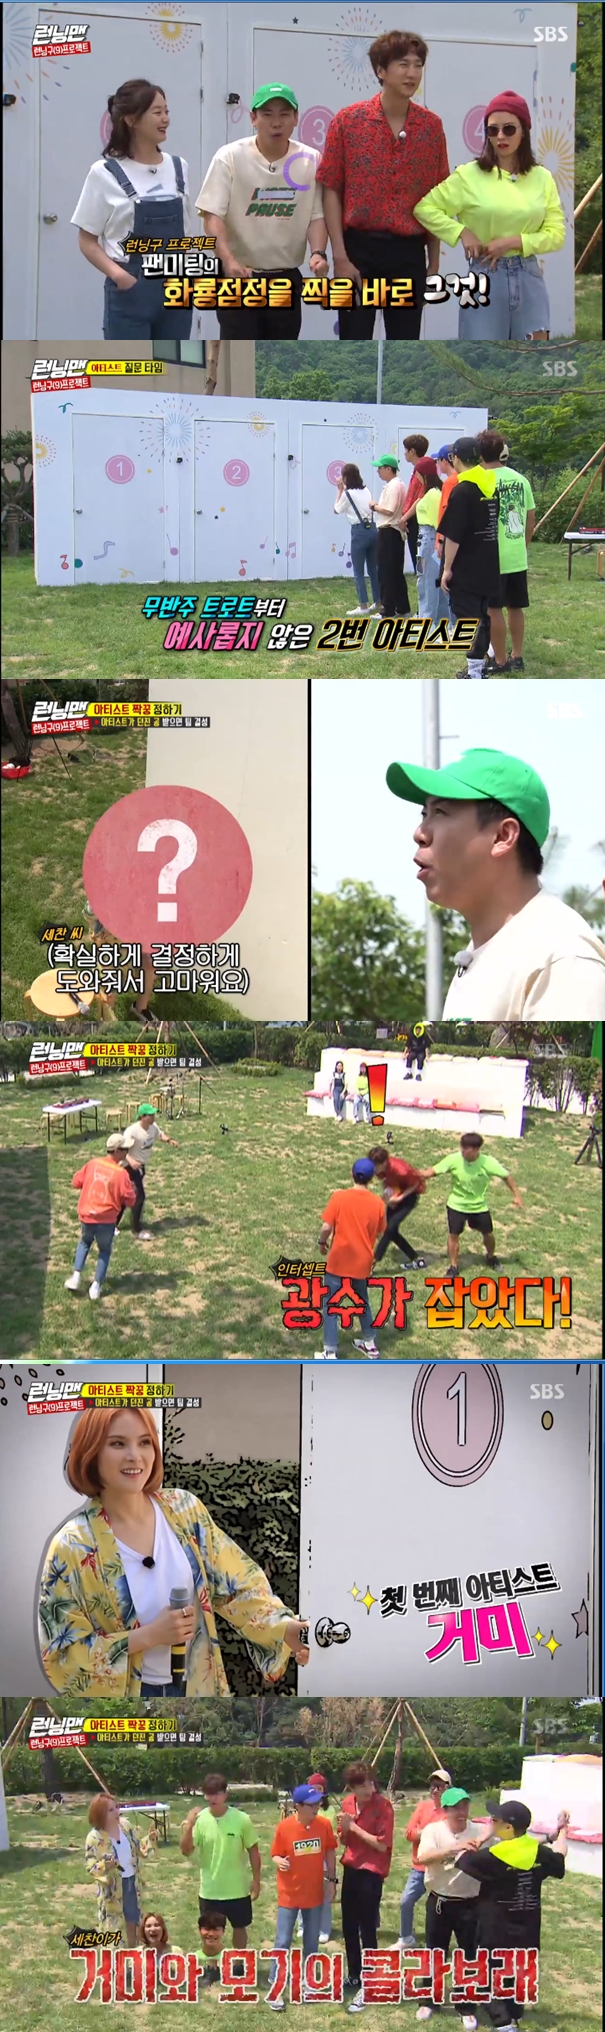 The colabo opponents of the spiders were Kim Jong-kook and Lee Kwang-soo.In the SBS entertainment program Running Man broadcasted on the afternoon of the 7th, a race was held for the artist and the collaboration, which is part of the running project.Four The Artists appeared on Running Man for the first collaboration stage in the country for the Running Man concert.Even after hearing only two trots, the male members did not hide their desire to team with The Artist No. 1.The Artist confirmed Kim Jong-kooks appearance and confirmed Kim Jong-kooks position with the desire to team with him.But Lee Kwang-soo cheered Kim Jong-kook after stealing the flying ball.The Artist sighed, choosing Kim Jong-kook as his second partner: the identity of The Artist No. 1, who everyone was curious about, was a spider.Yoo Jae-Suk confirmed the identity of the spider and expressed satisfaction, saying, Kim Jong-kook and spider collaboration are expected.Yang Se-chan laughed, saying, Is not it a cola of spiders and mosquitoes?In addition to this, Yoo Jae-Suk even mentioned Lee Kwang-soo and said, It is more than cola of spiders, mosquitoes and farts.